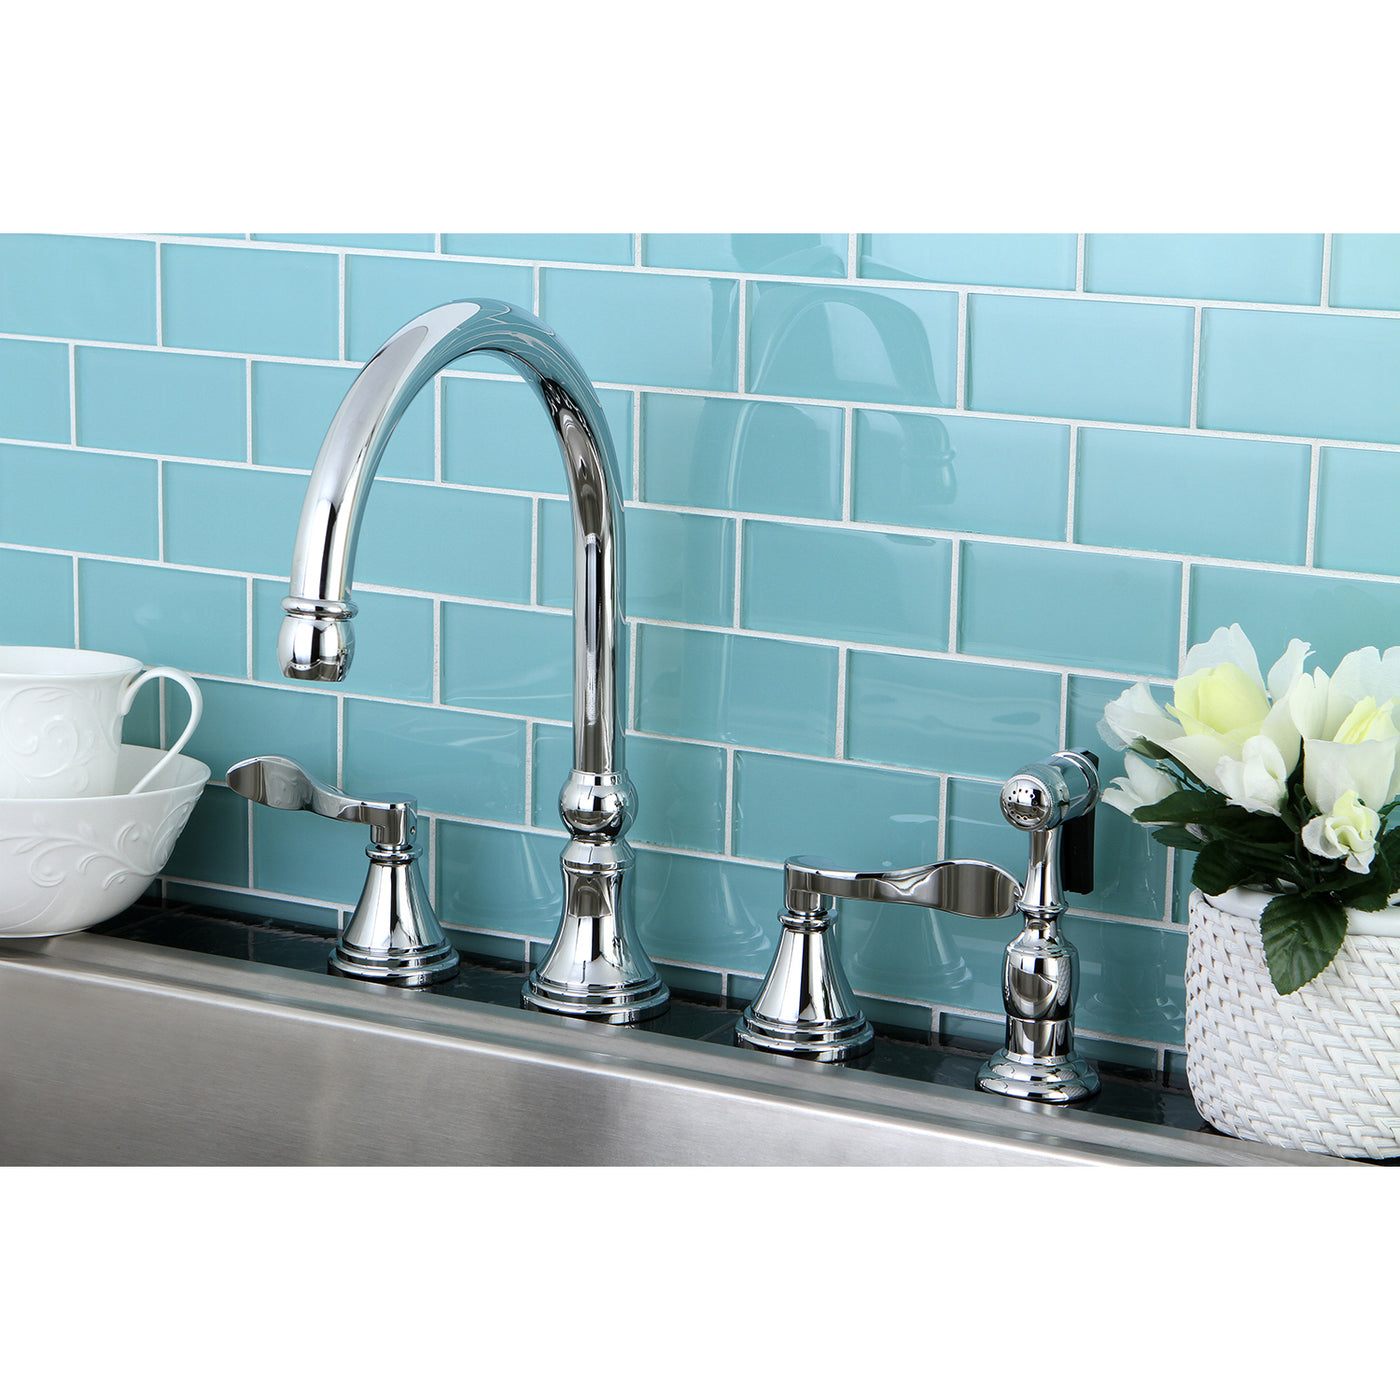 Elements of Design ES2791DFLBS Widespread Kitchen Faucet with Brass Sprayer, Polished Chrome